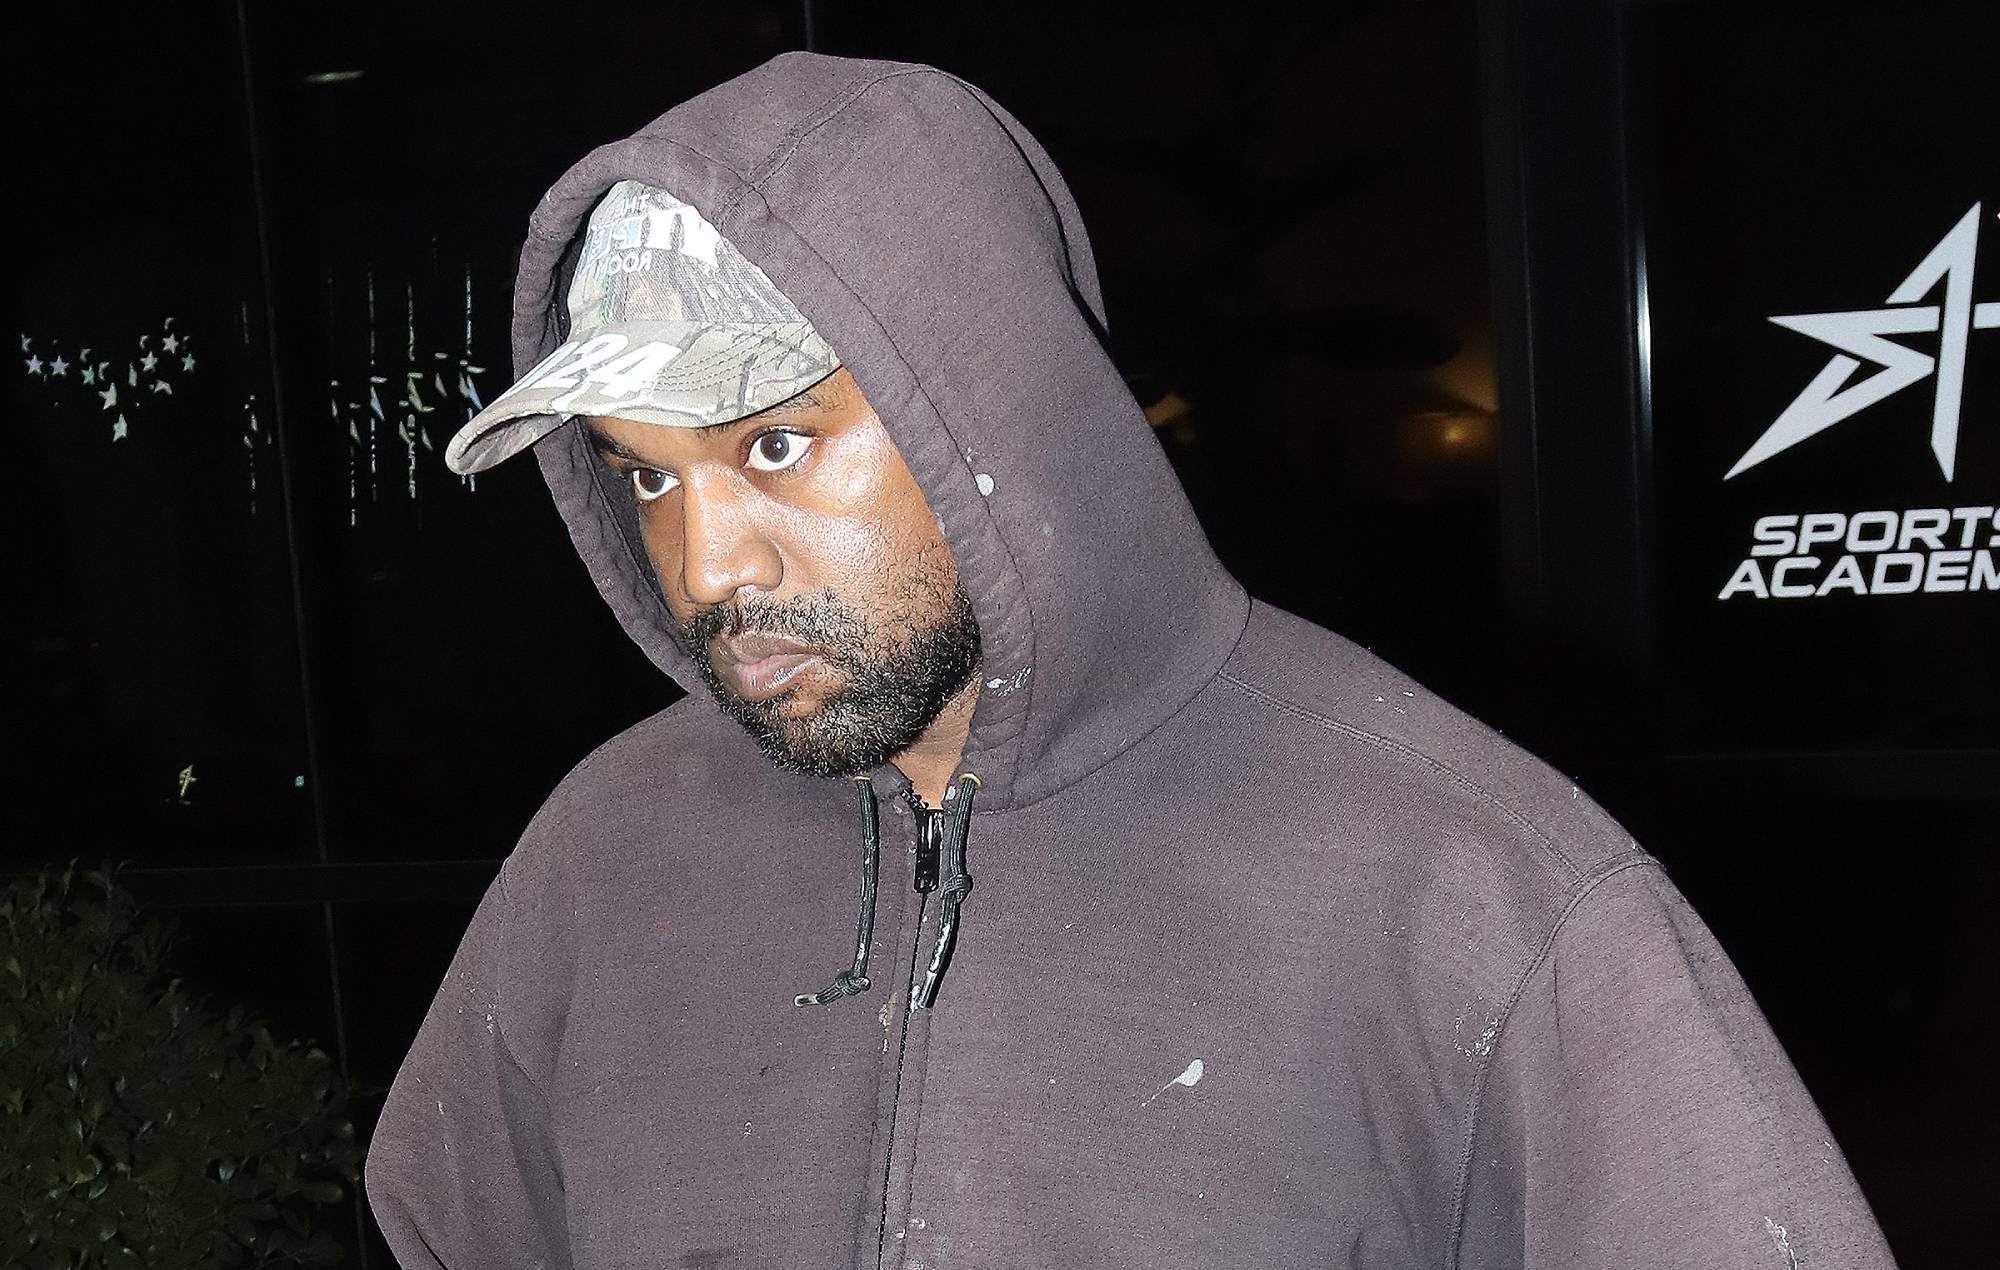 Adidas CEO says Kanye West is “not a bad person”